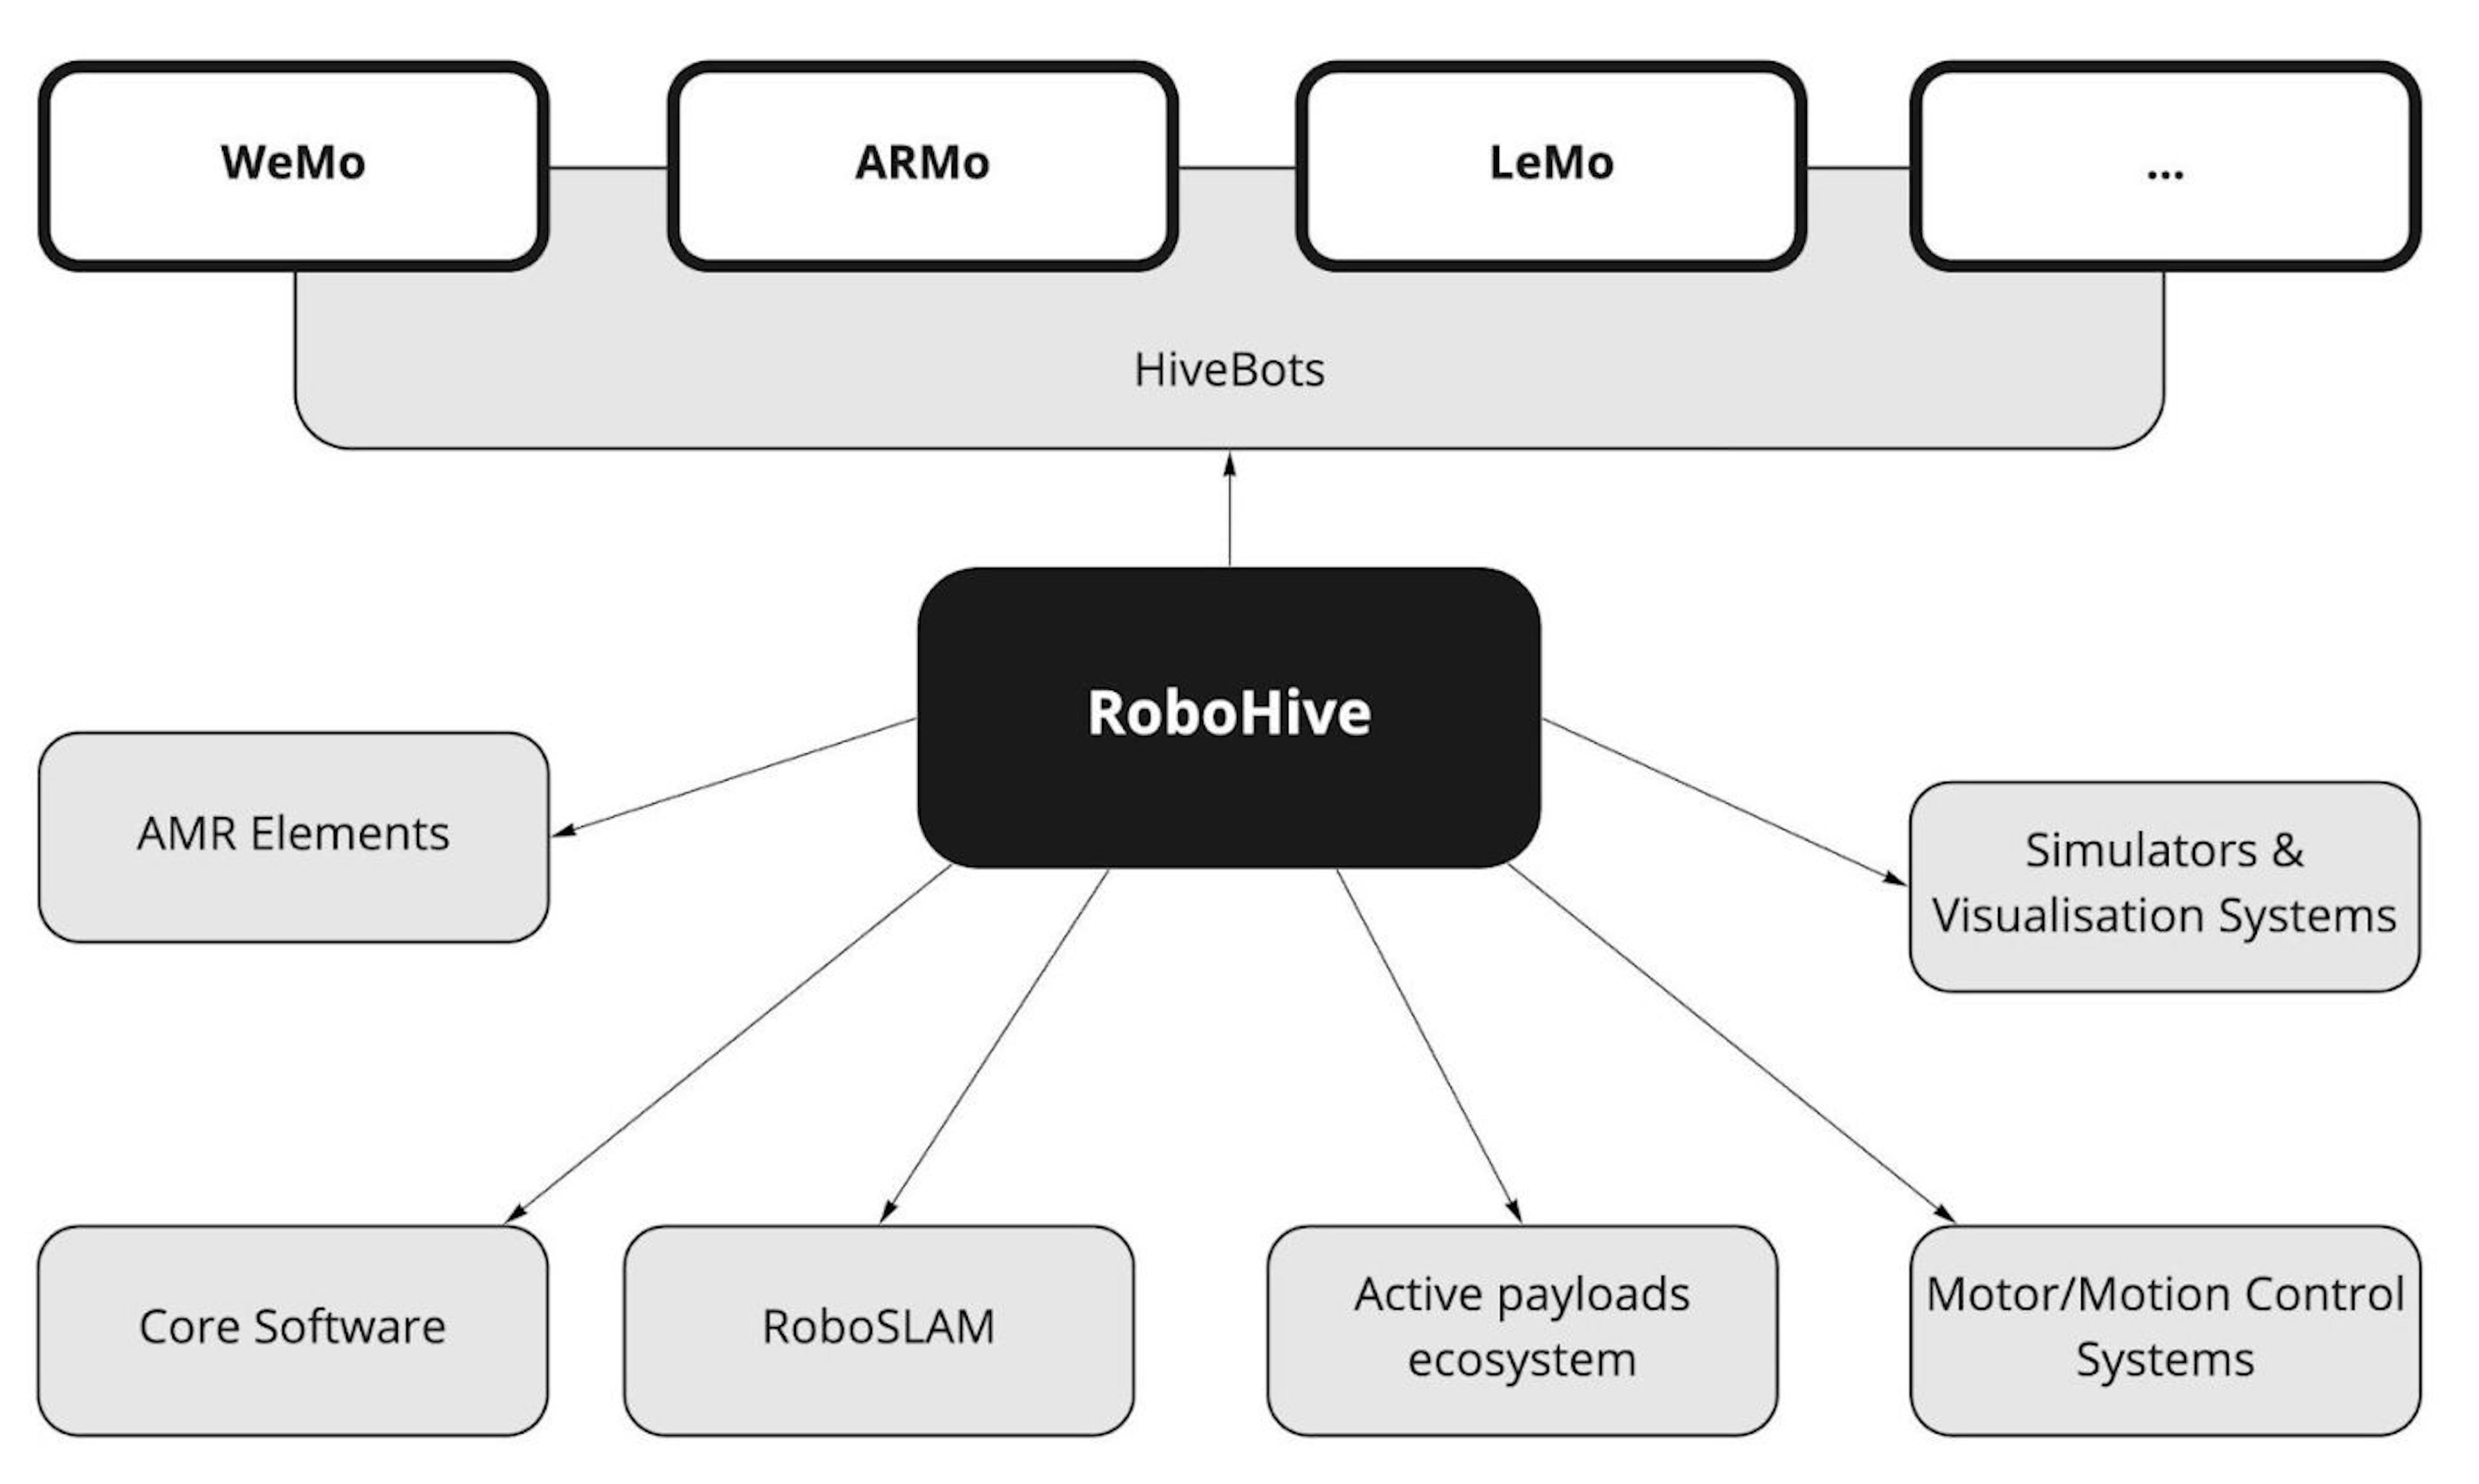 Technologies and products developed as part of the RoboHive ecosystem of mobile robots